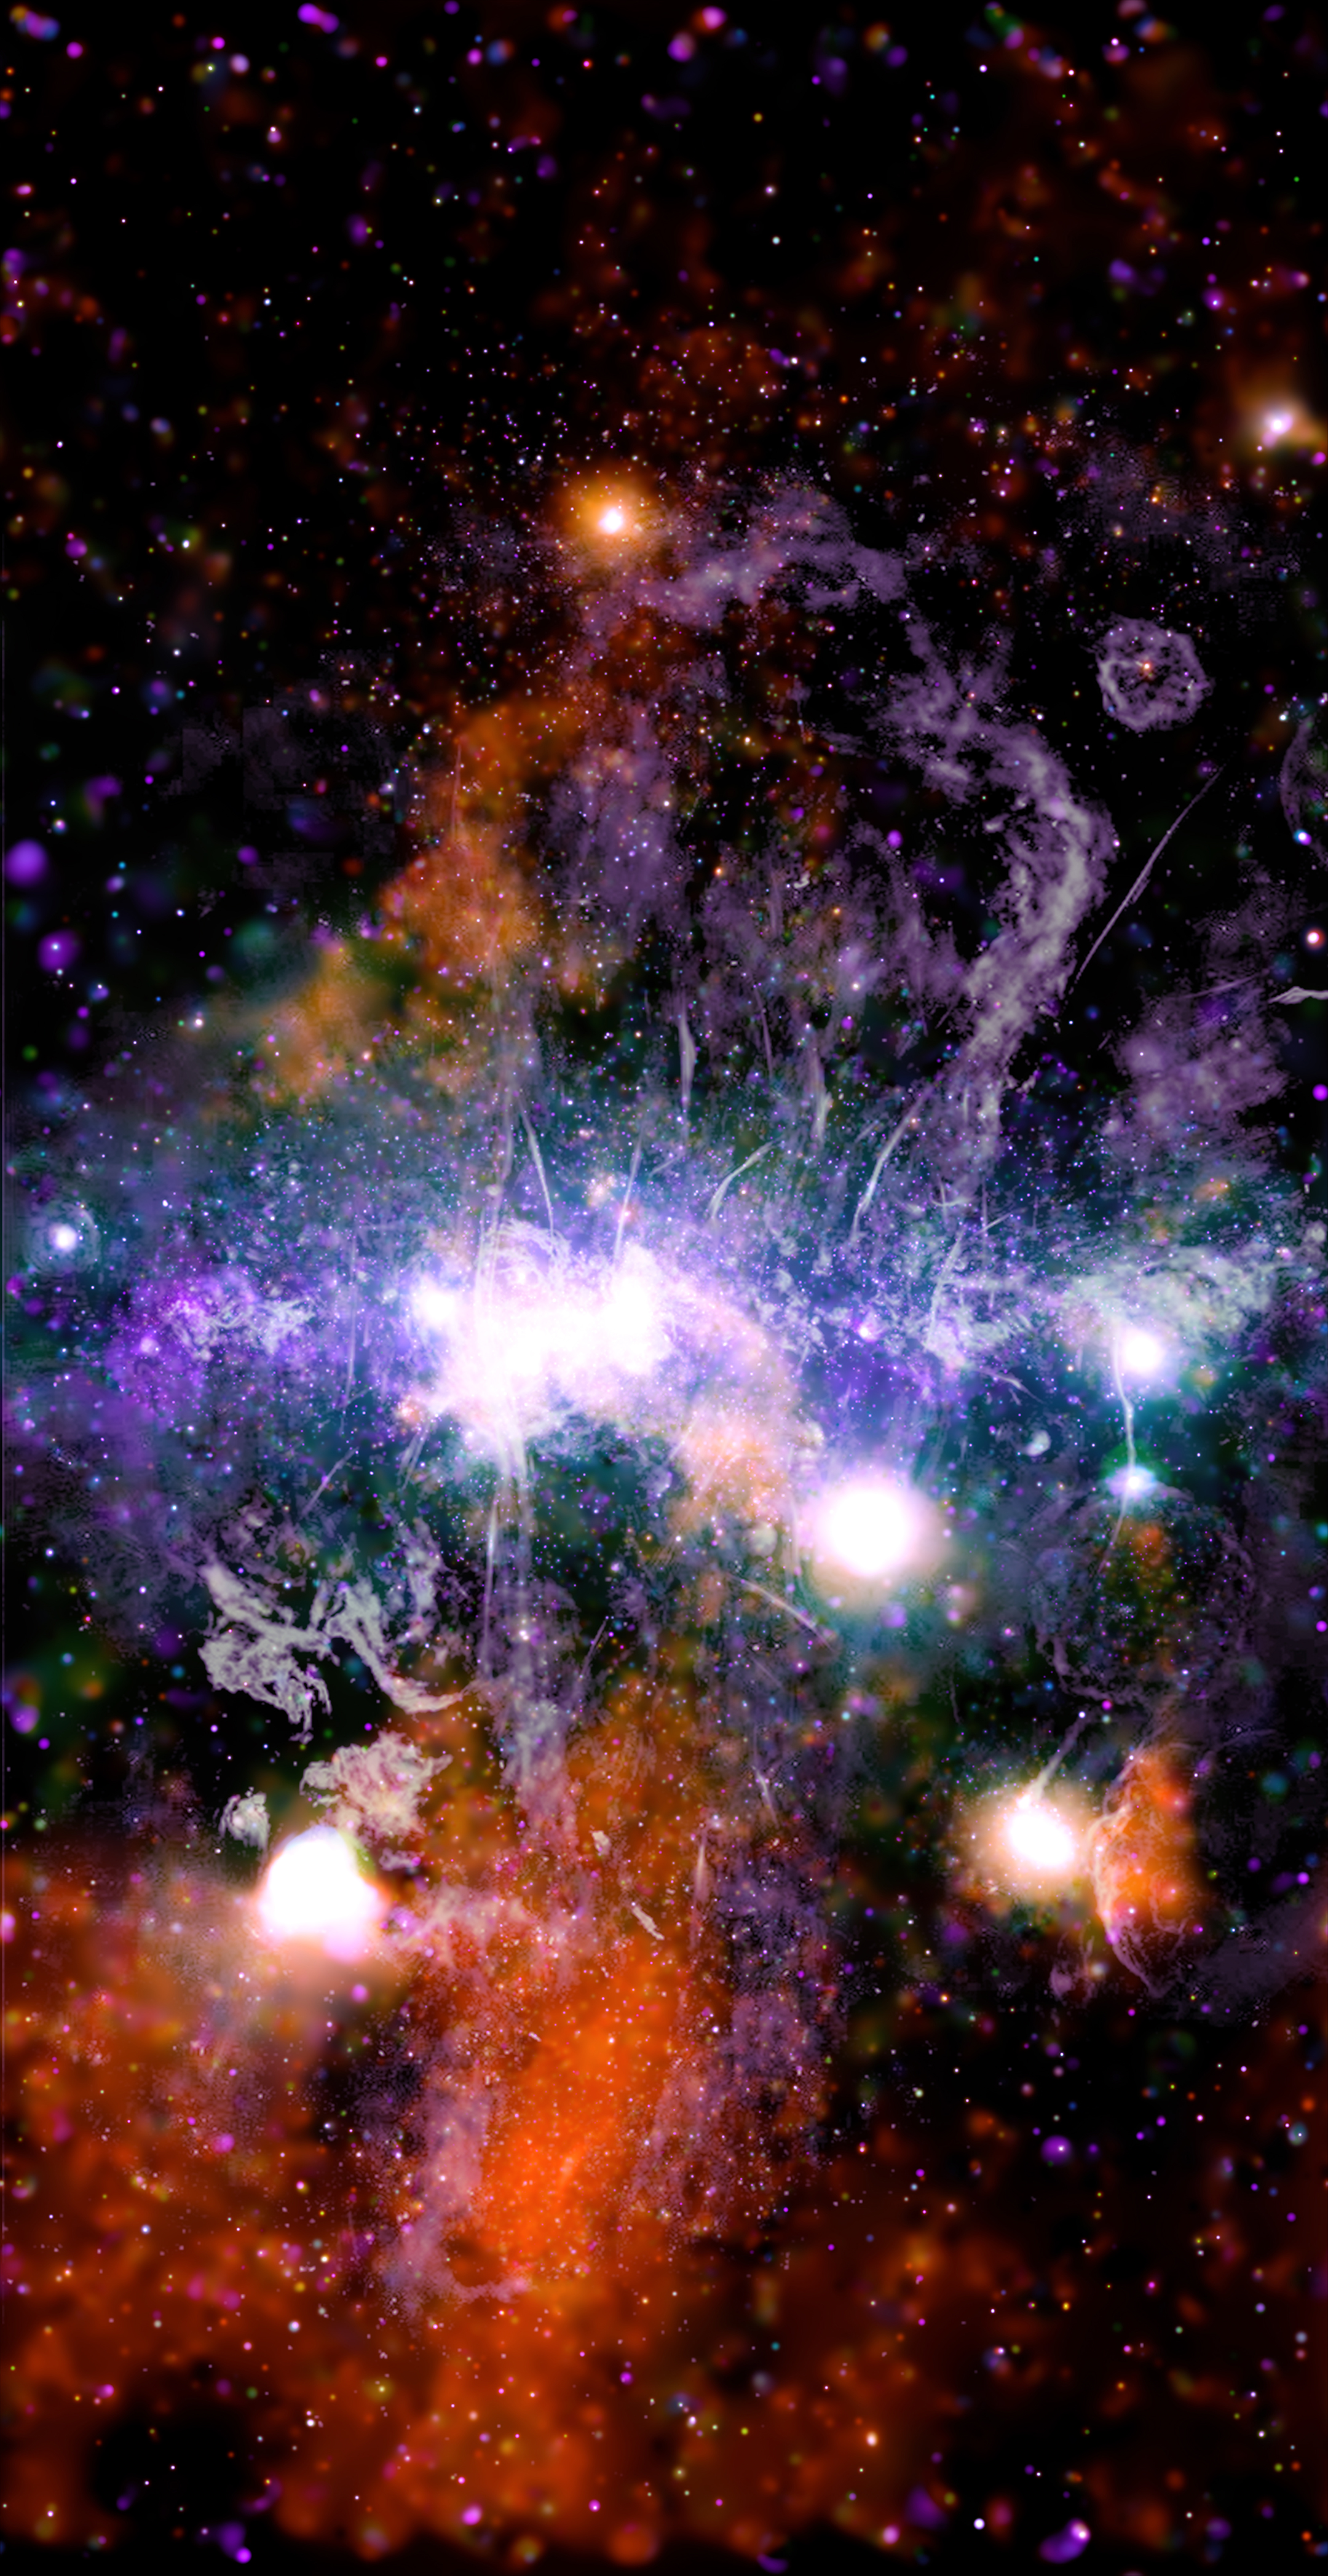 Image of the center of the Milky Way galaxy with a cluster of white stars in a blue cloud in the middle and a sinew of red-orange in the background